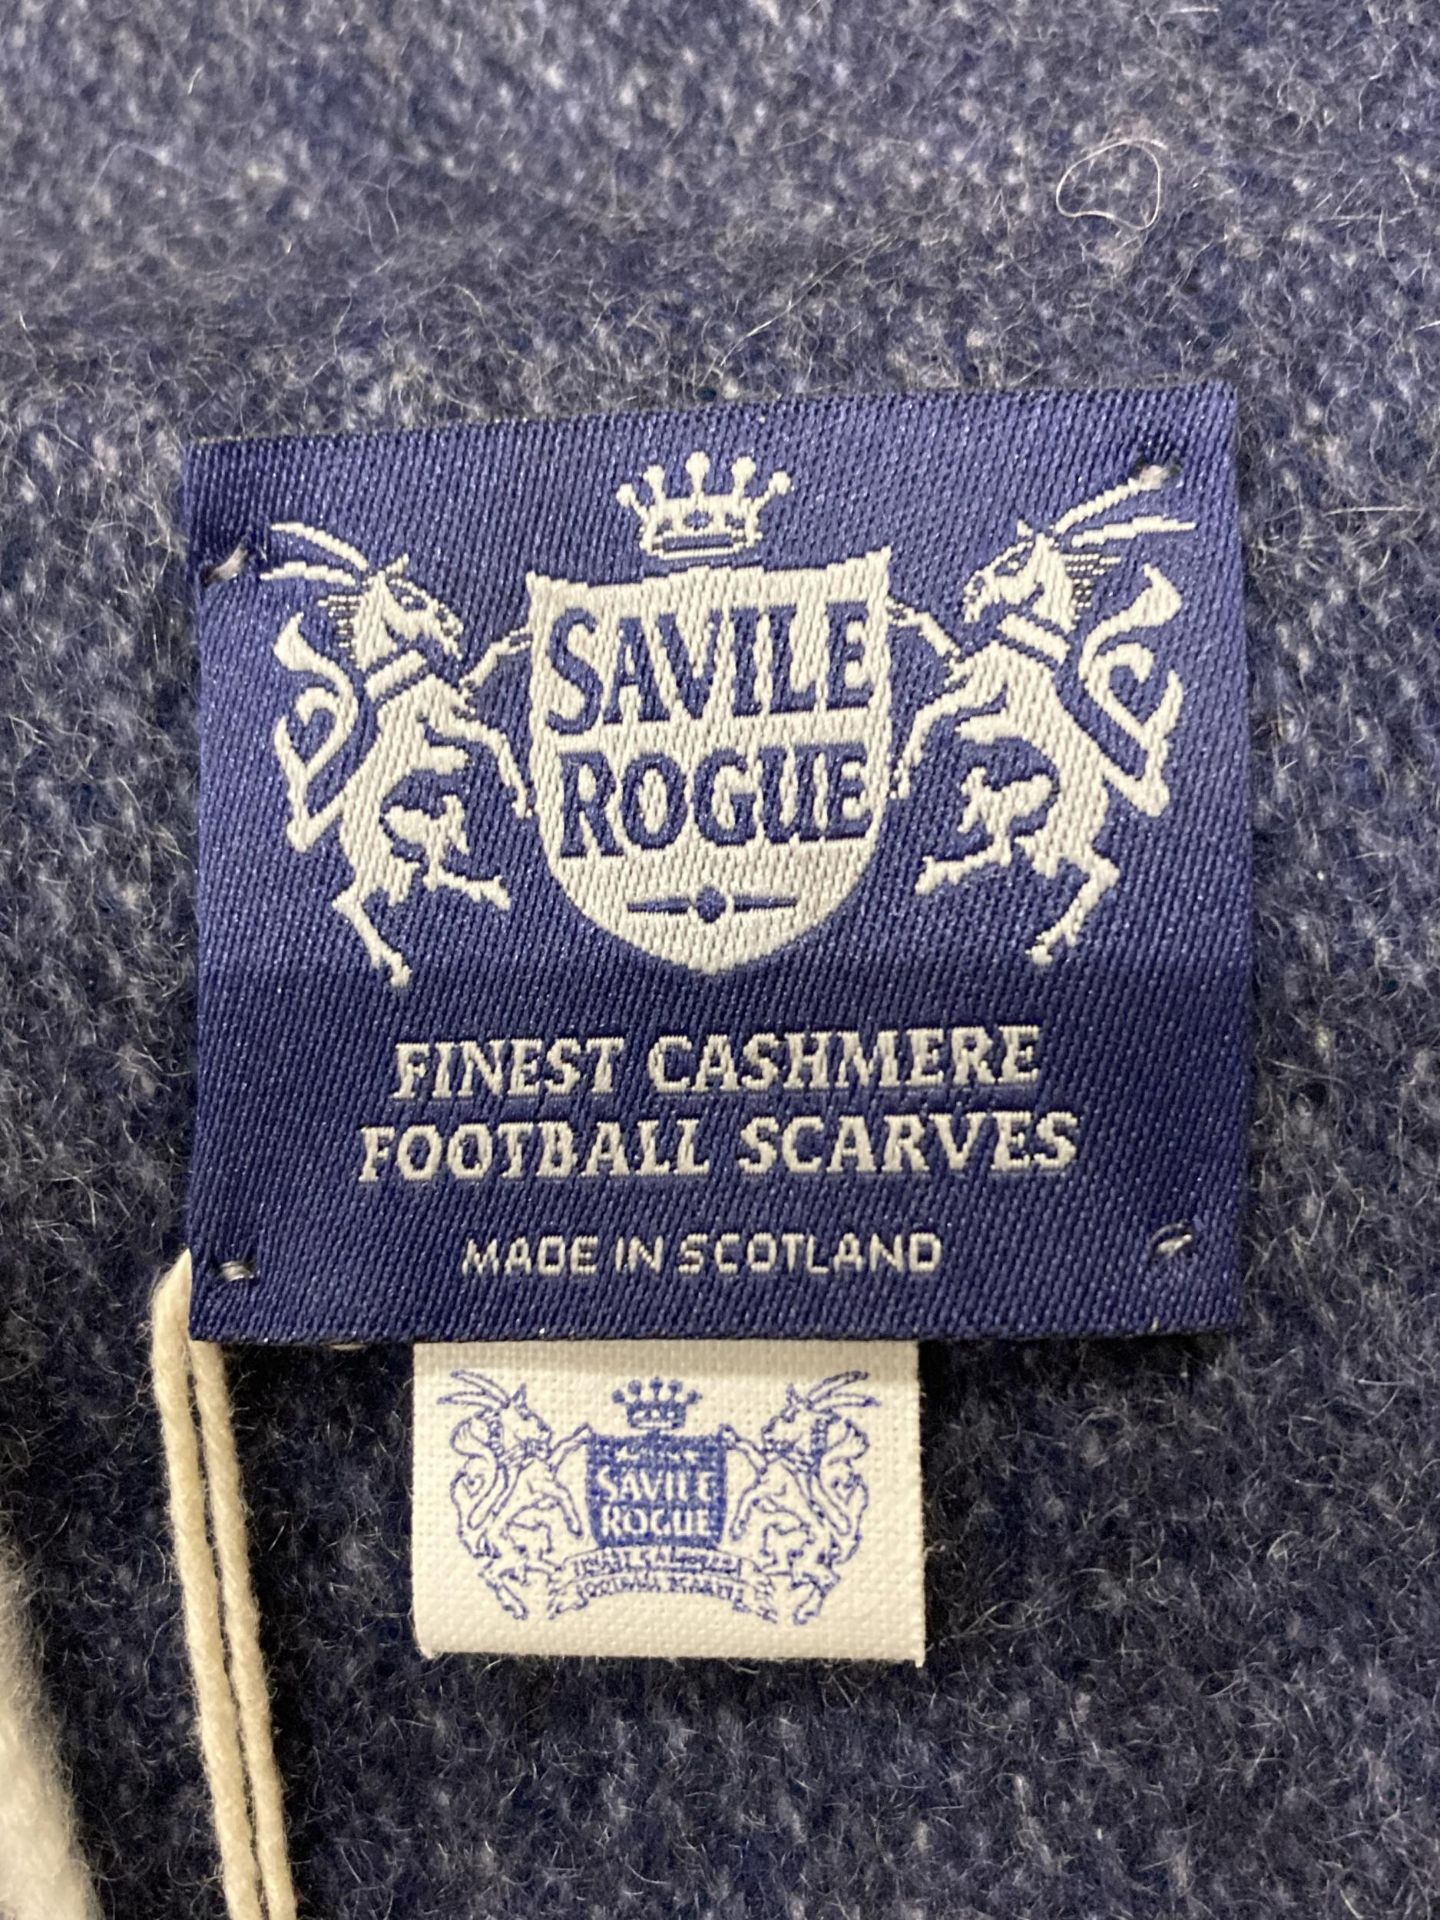 A BOXED SAVILLE ROGUE CASHMERE FOOTBALL SCARF AND FURTHER CASHMERE SCOTTISH SCARF - Image 3 of 6